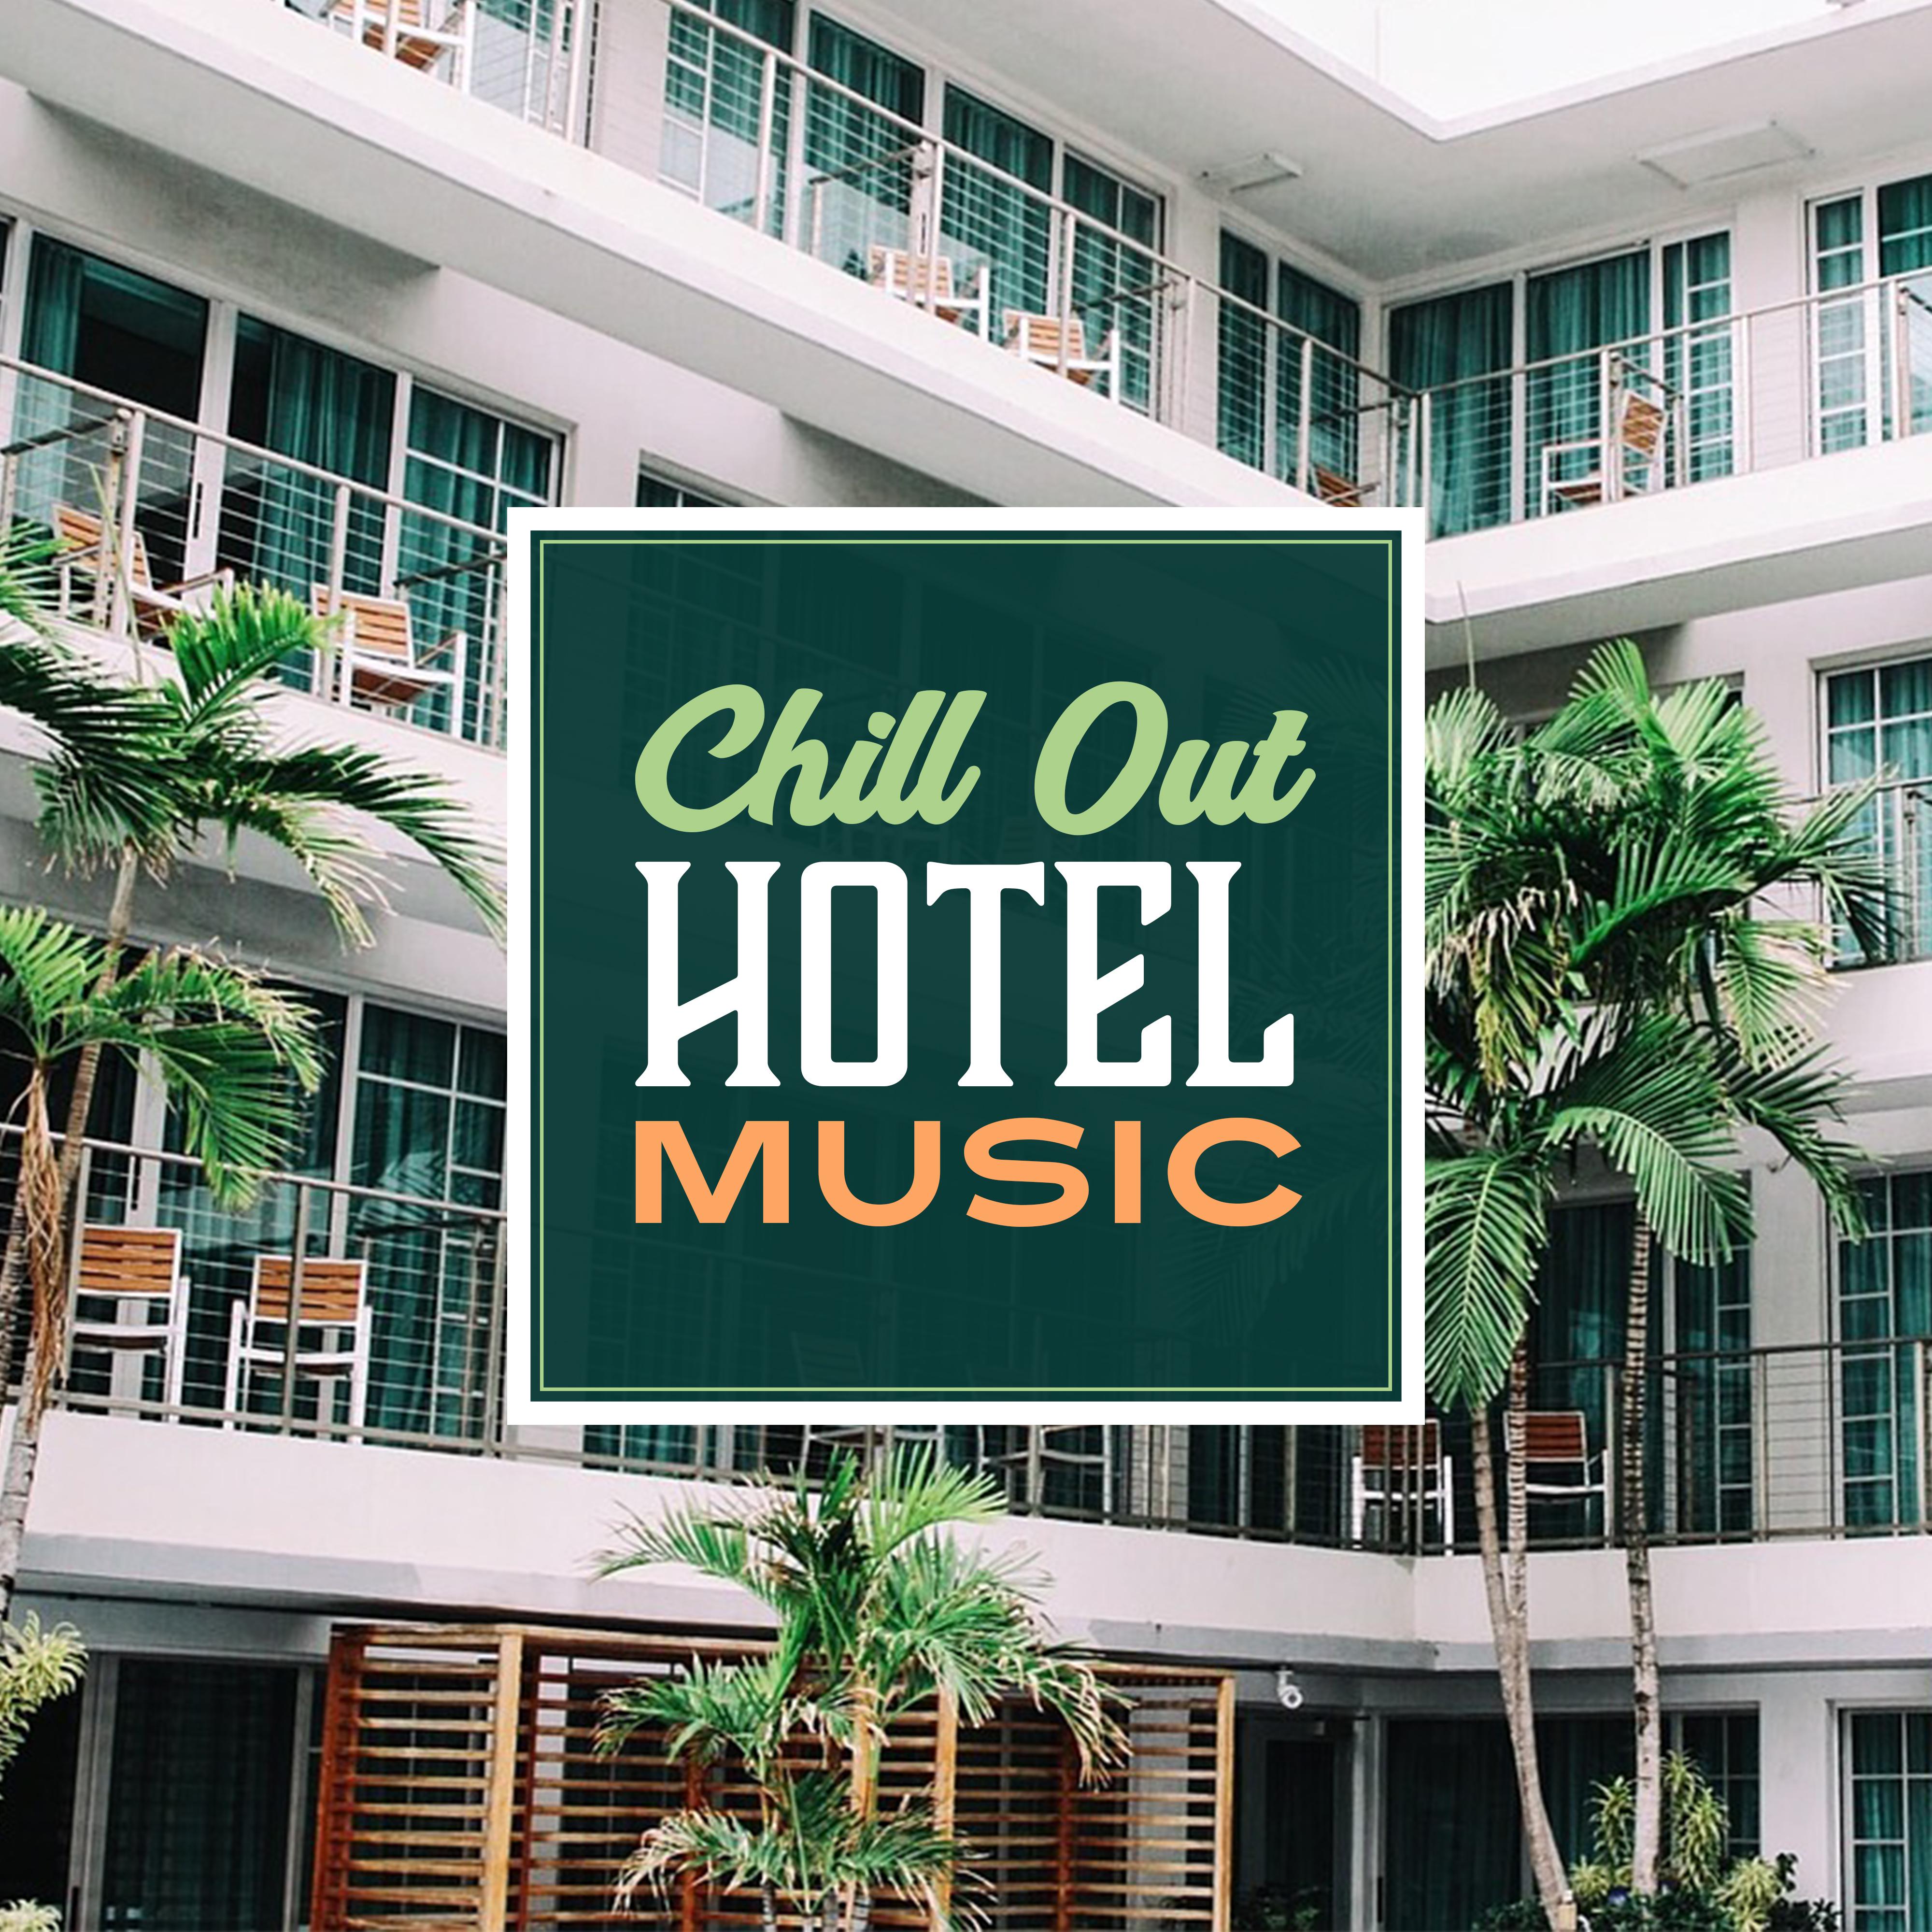 Chill Out Hotel Music  Soft Sounds for Hotel Relaxation, Inner Calmness, Peaceful Melodies